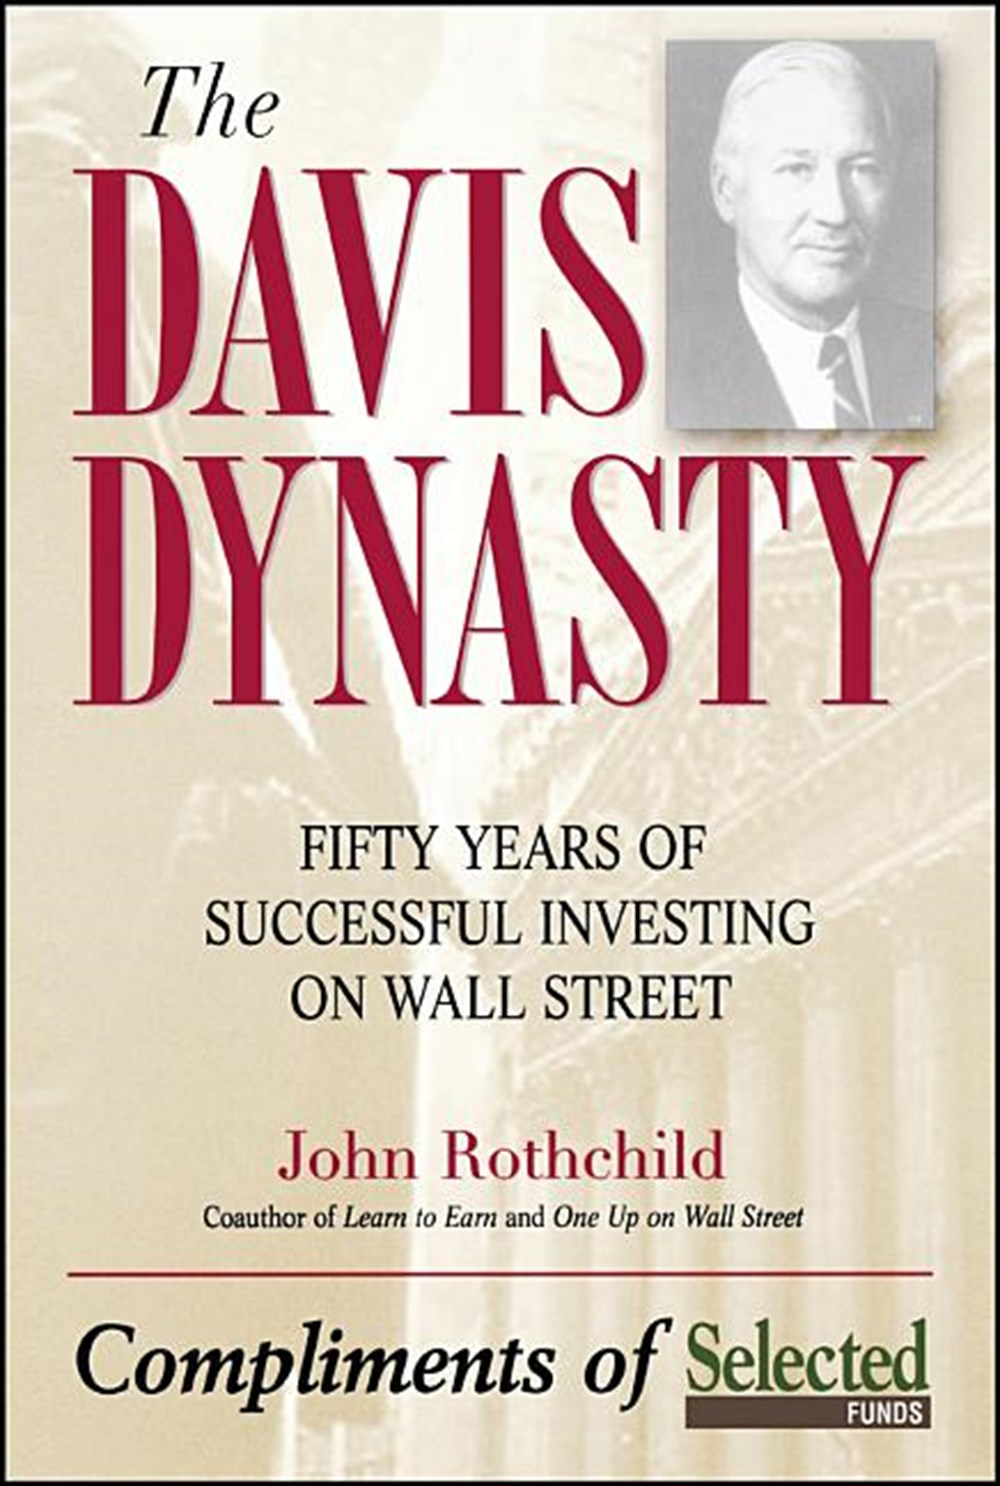 Davis Discipline: Fifty Years of Successful Investing on Wall Street